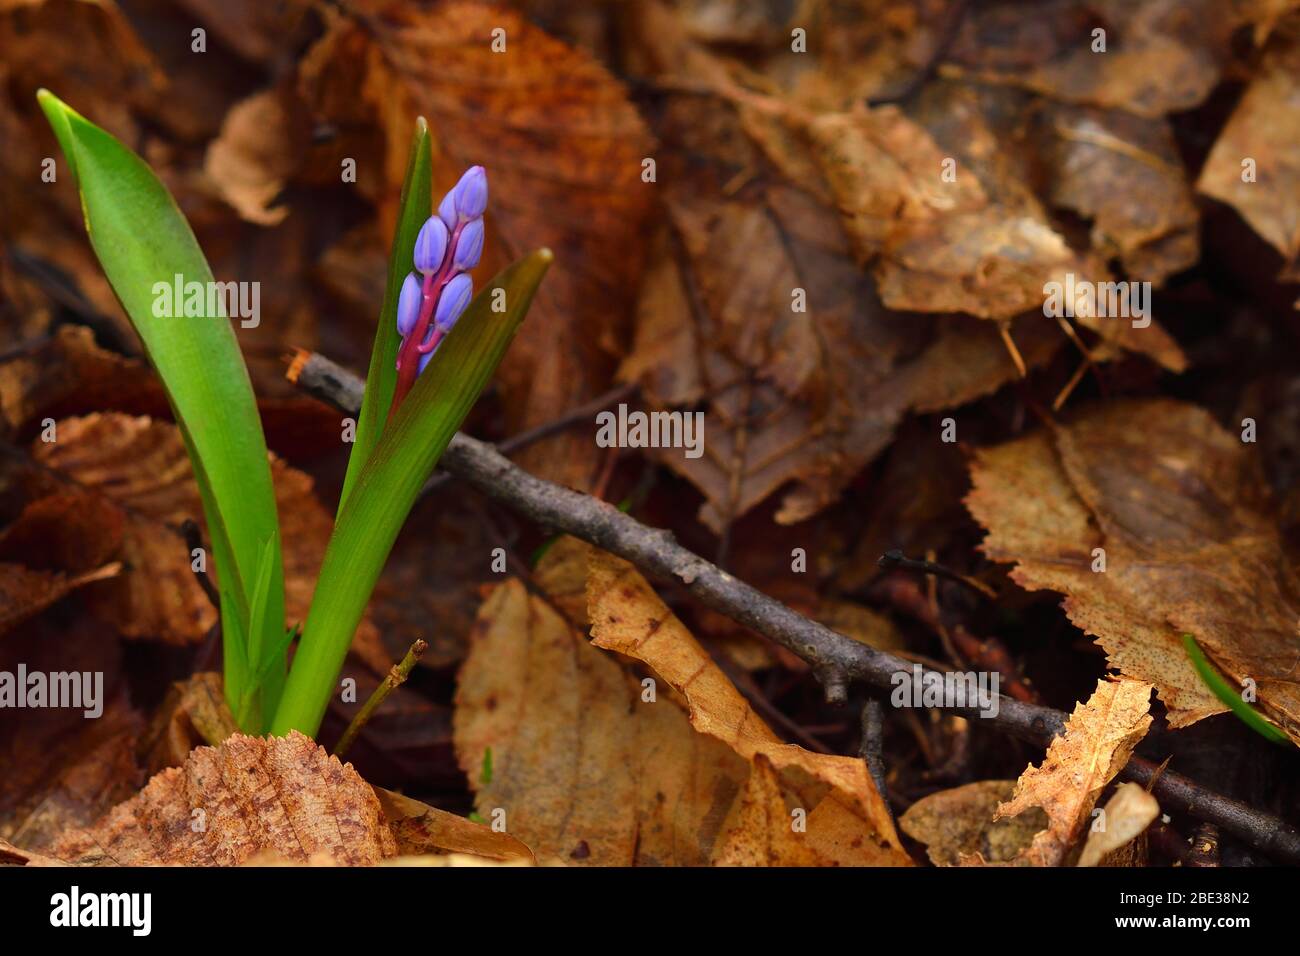 Beautiful scilla flower on a brown leaves background. Violet to gentian-blue gradient. Copy space on the right. Stock Photo